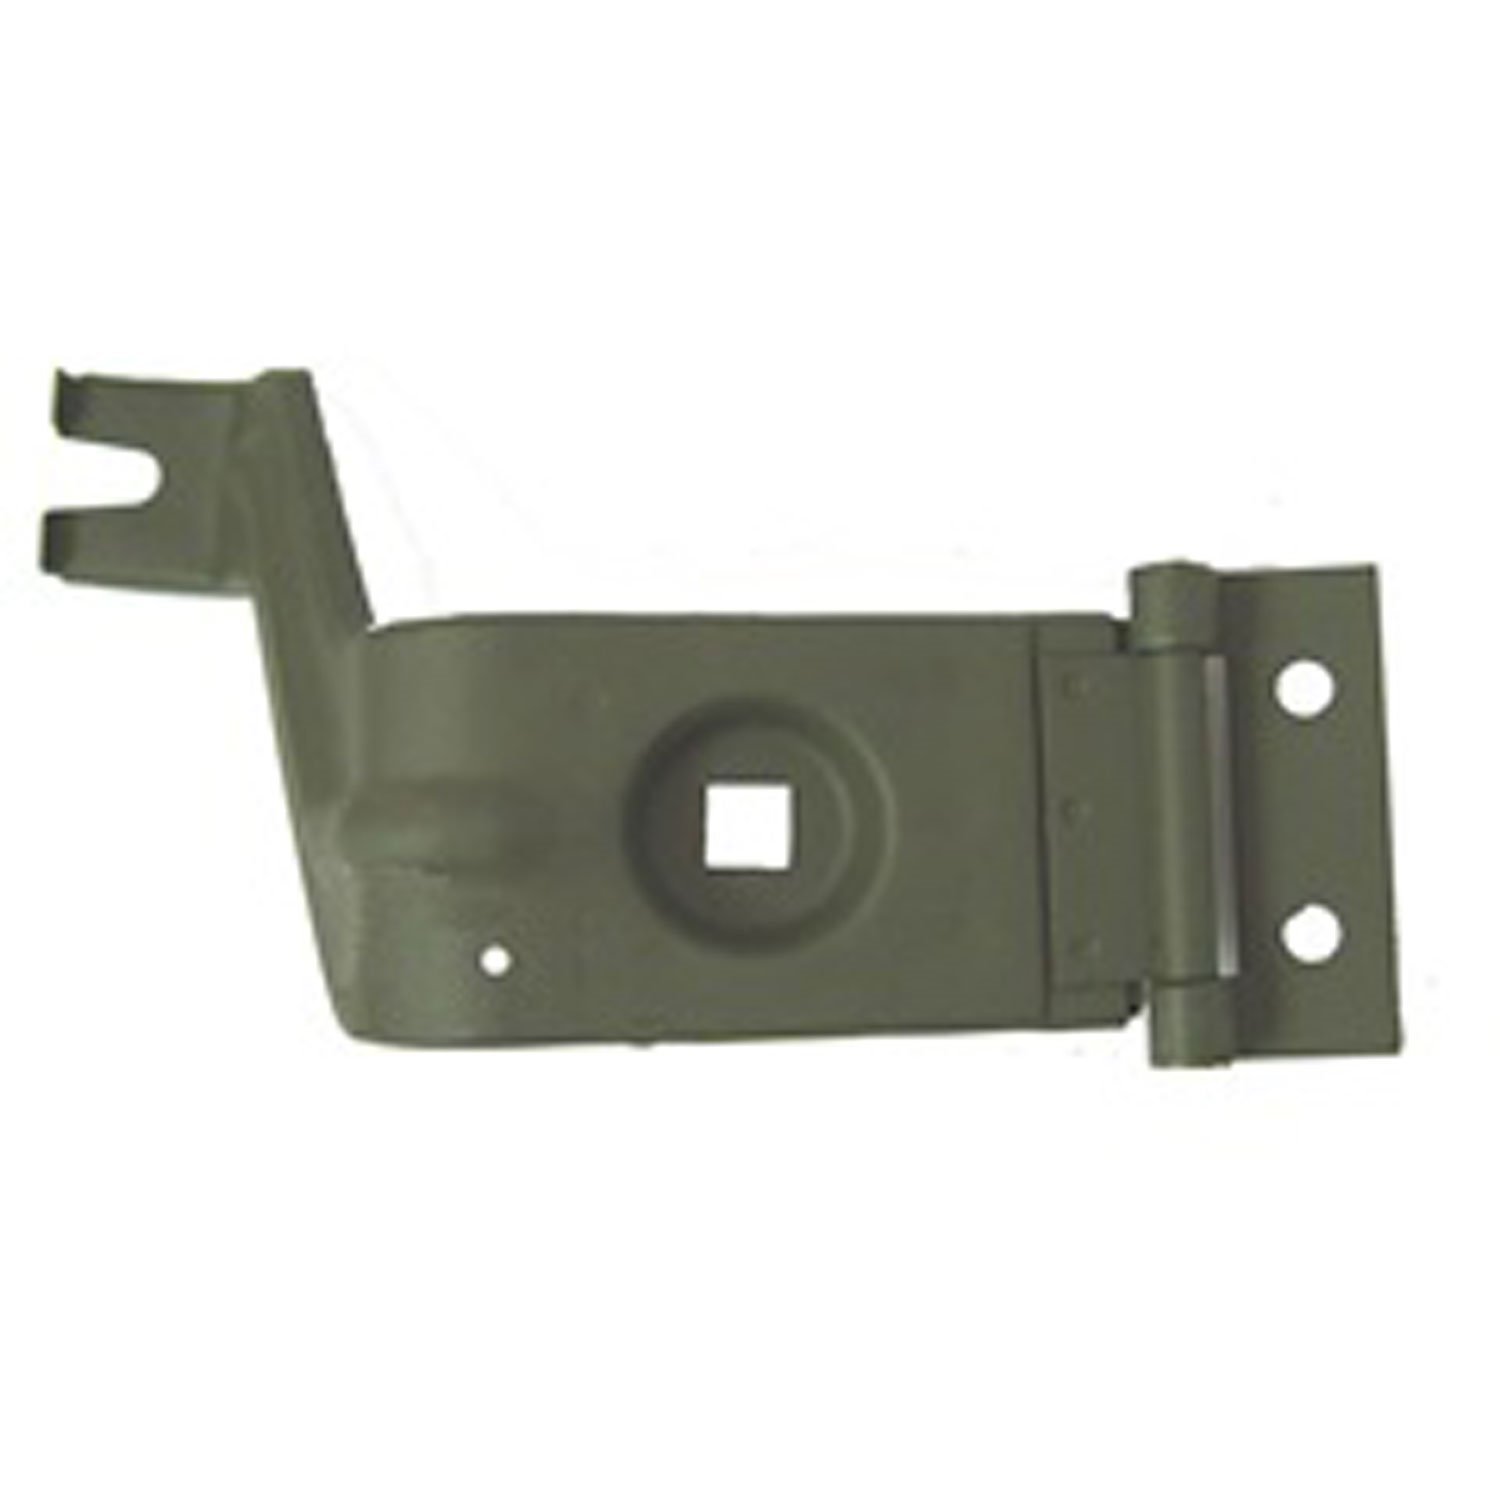 This reproduction headlight housing bracket from Omix-ADA fits the left side on 41-45 Willys MB and Ford GPW.